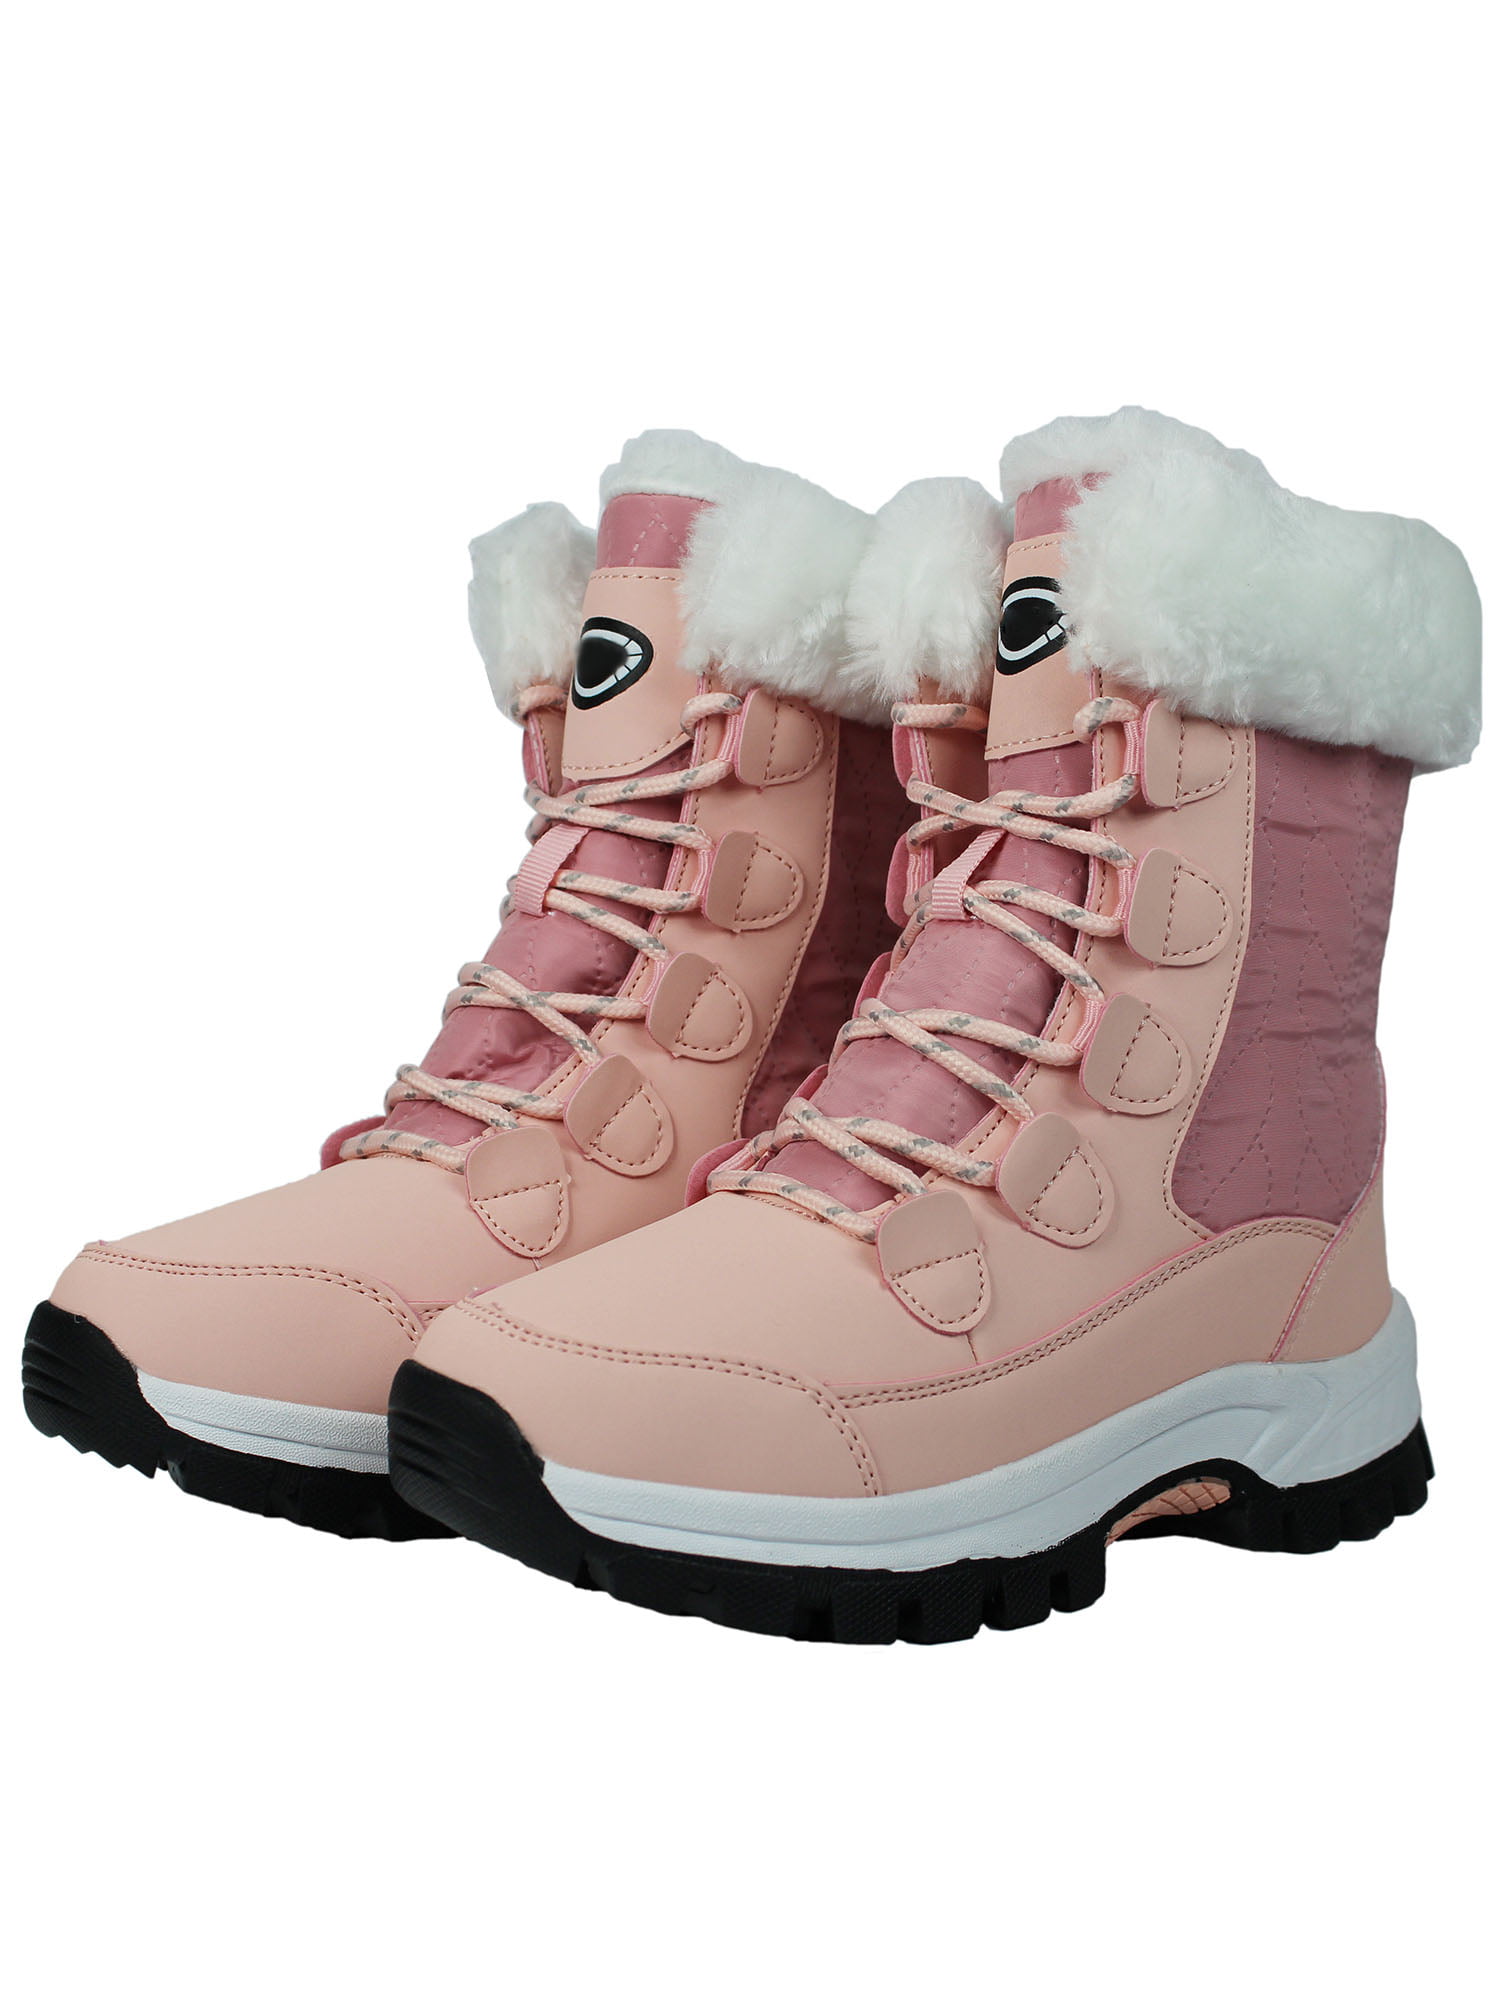 Women Winter Warm Fur Lined Outdoor Boots Ladies Non-slip Hiking Snow Shoes 6-10